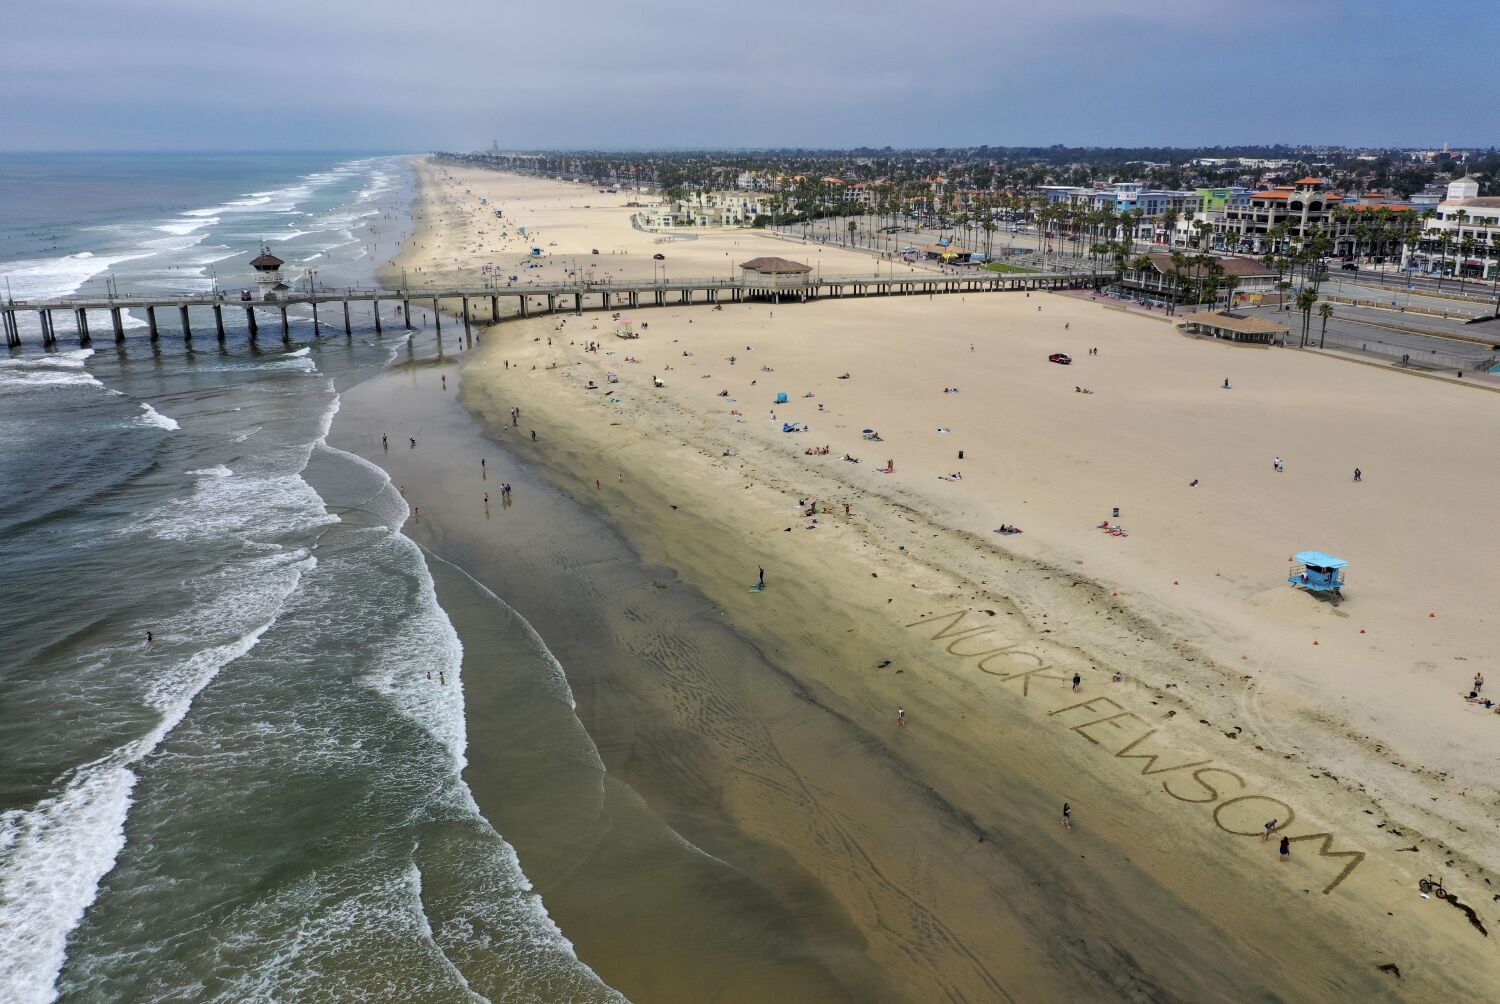 Huntington Beach officials clear waters and beach due to oil-like 'sheen'